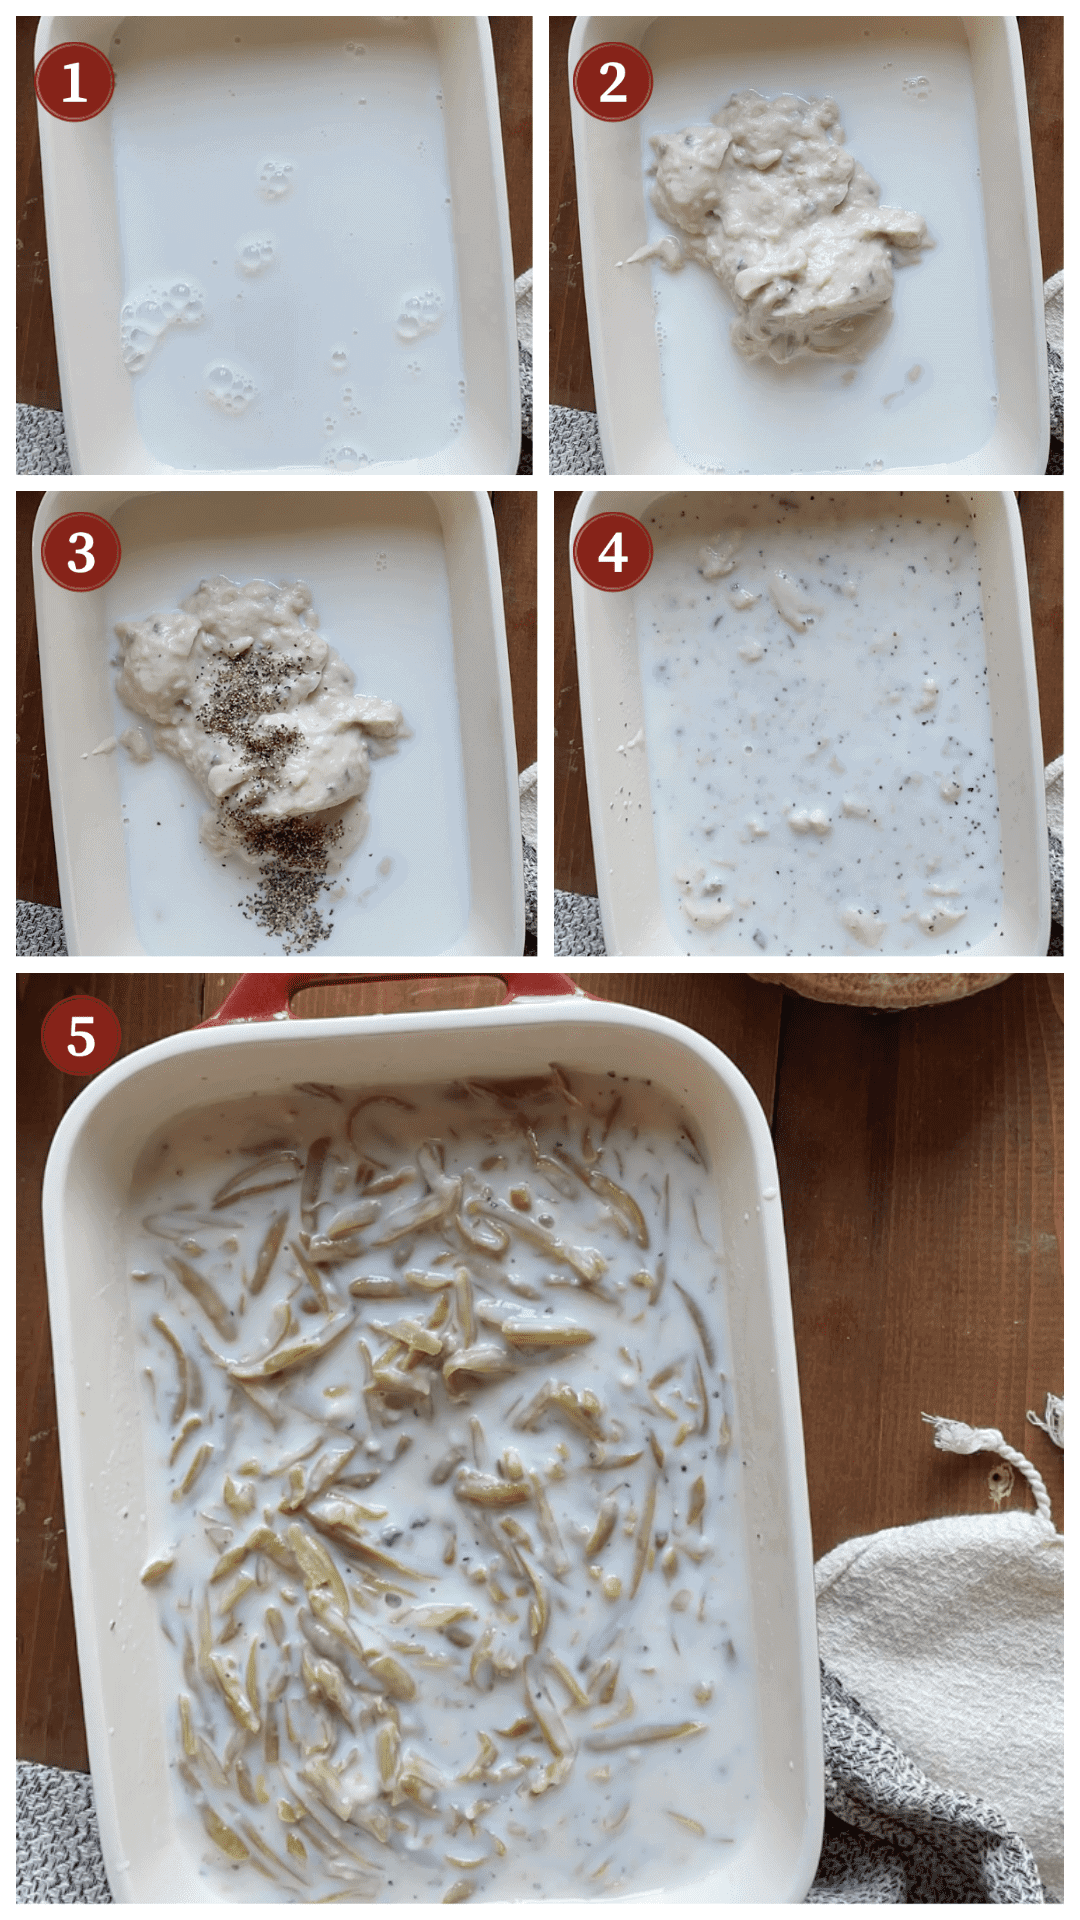 A process collage of images showing how to make green bean casserole, steps 1 - 5